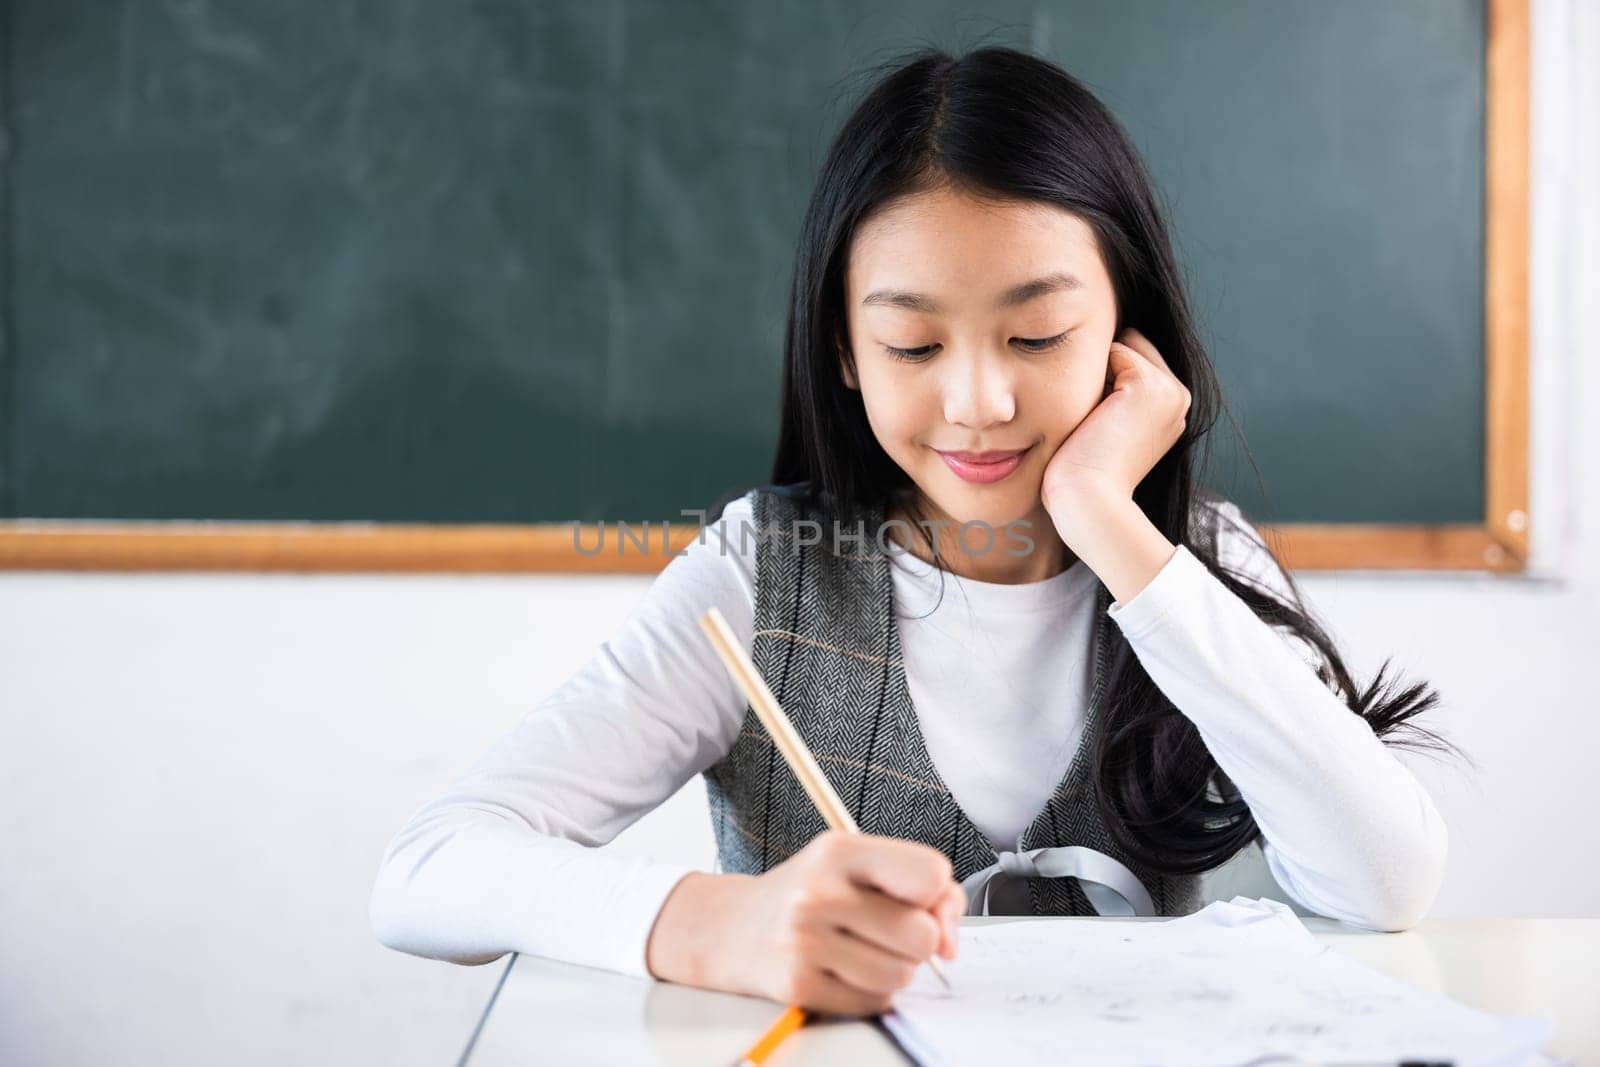 A girl is sitting at a desk and writing with a pencil by Sorapop